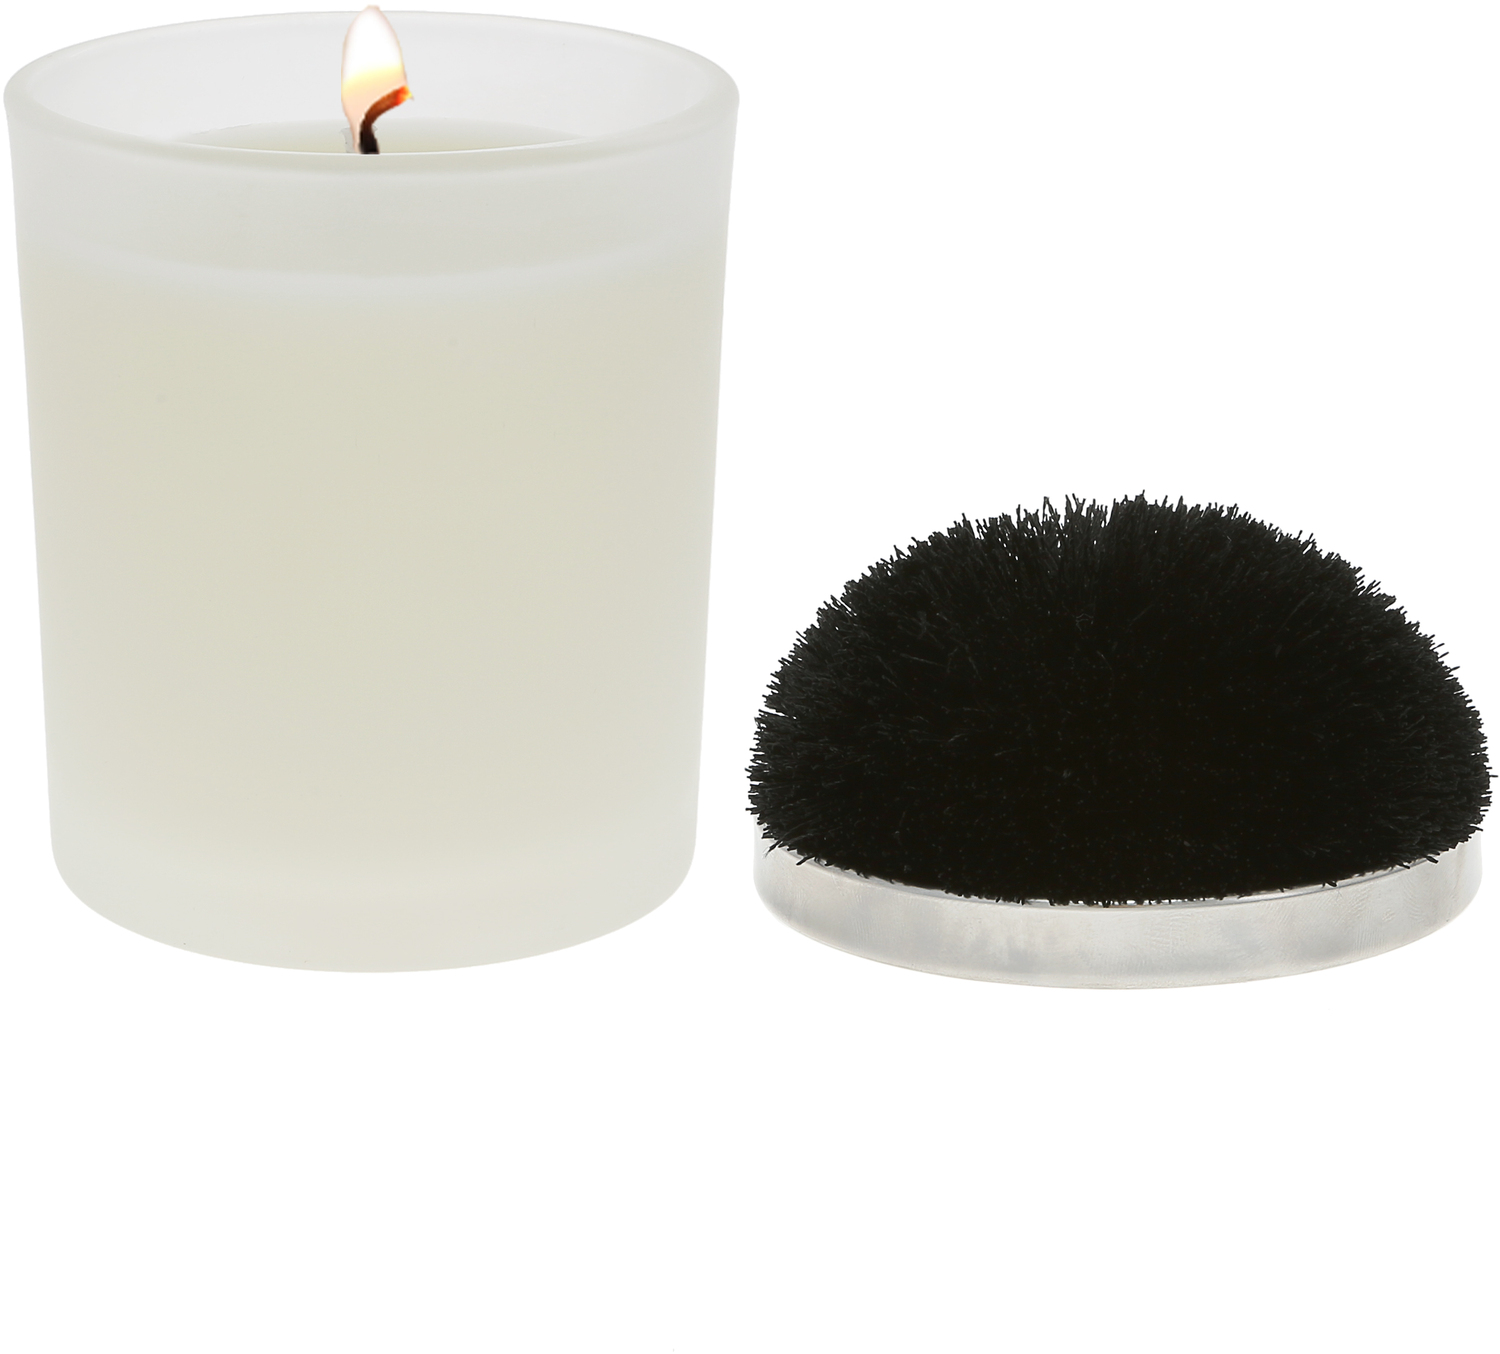 Blank - Black by Repre-Scent - Blank - Black - 5.5 oz - 100% Soy Wax Candle with Pom Pom Lid
Scent: Tranquility